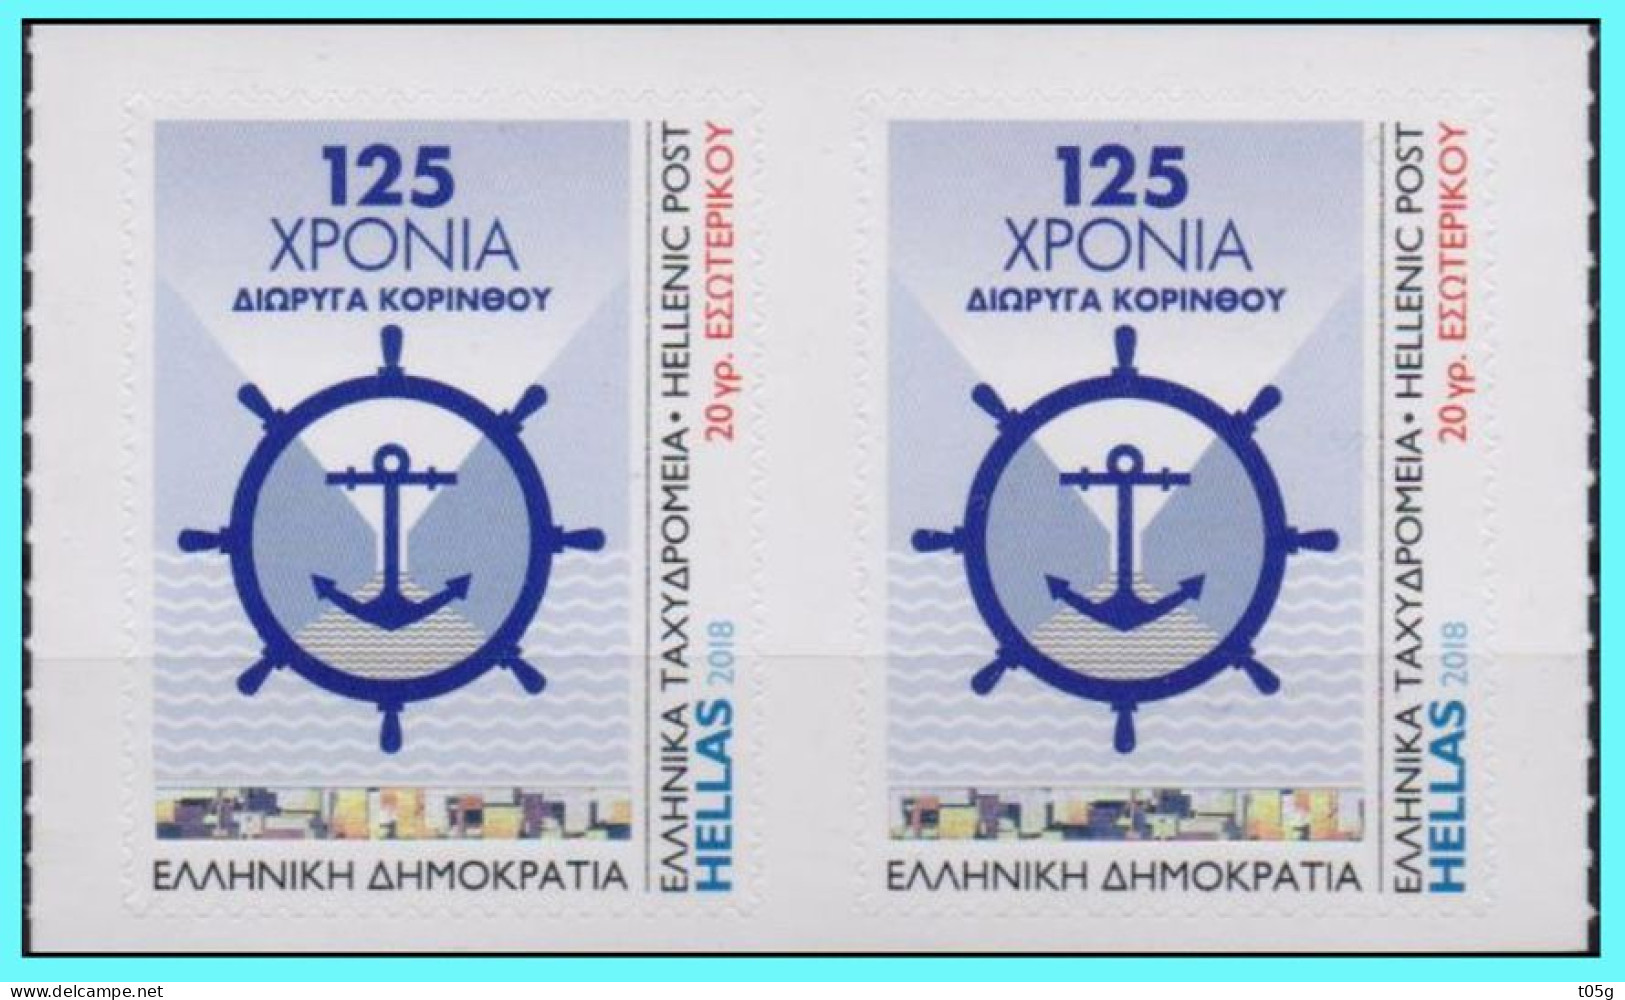 GREECE- GRECE  - HELLAS  2018: 125 YEARS OF THE KORINTH CANAL- Two Self-athesive Stamps From Booklet  MNH** - Unused Stamps